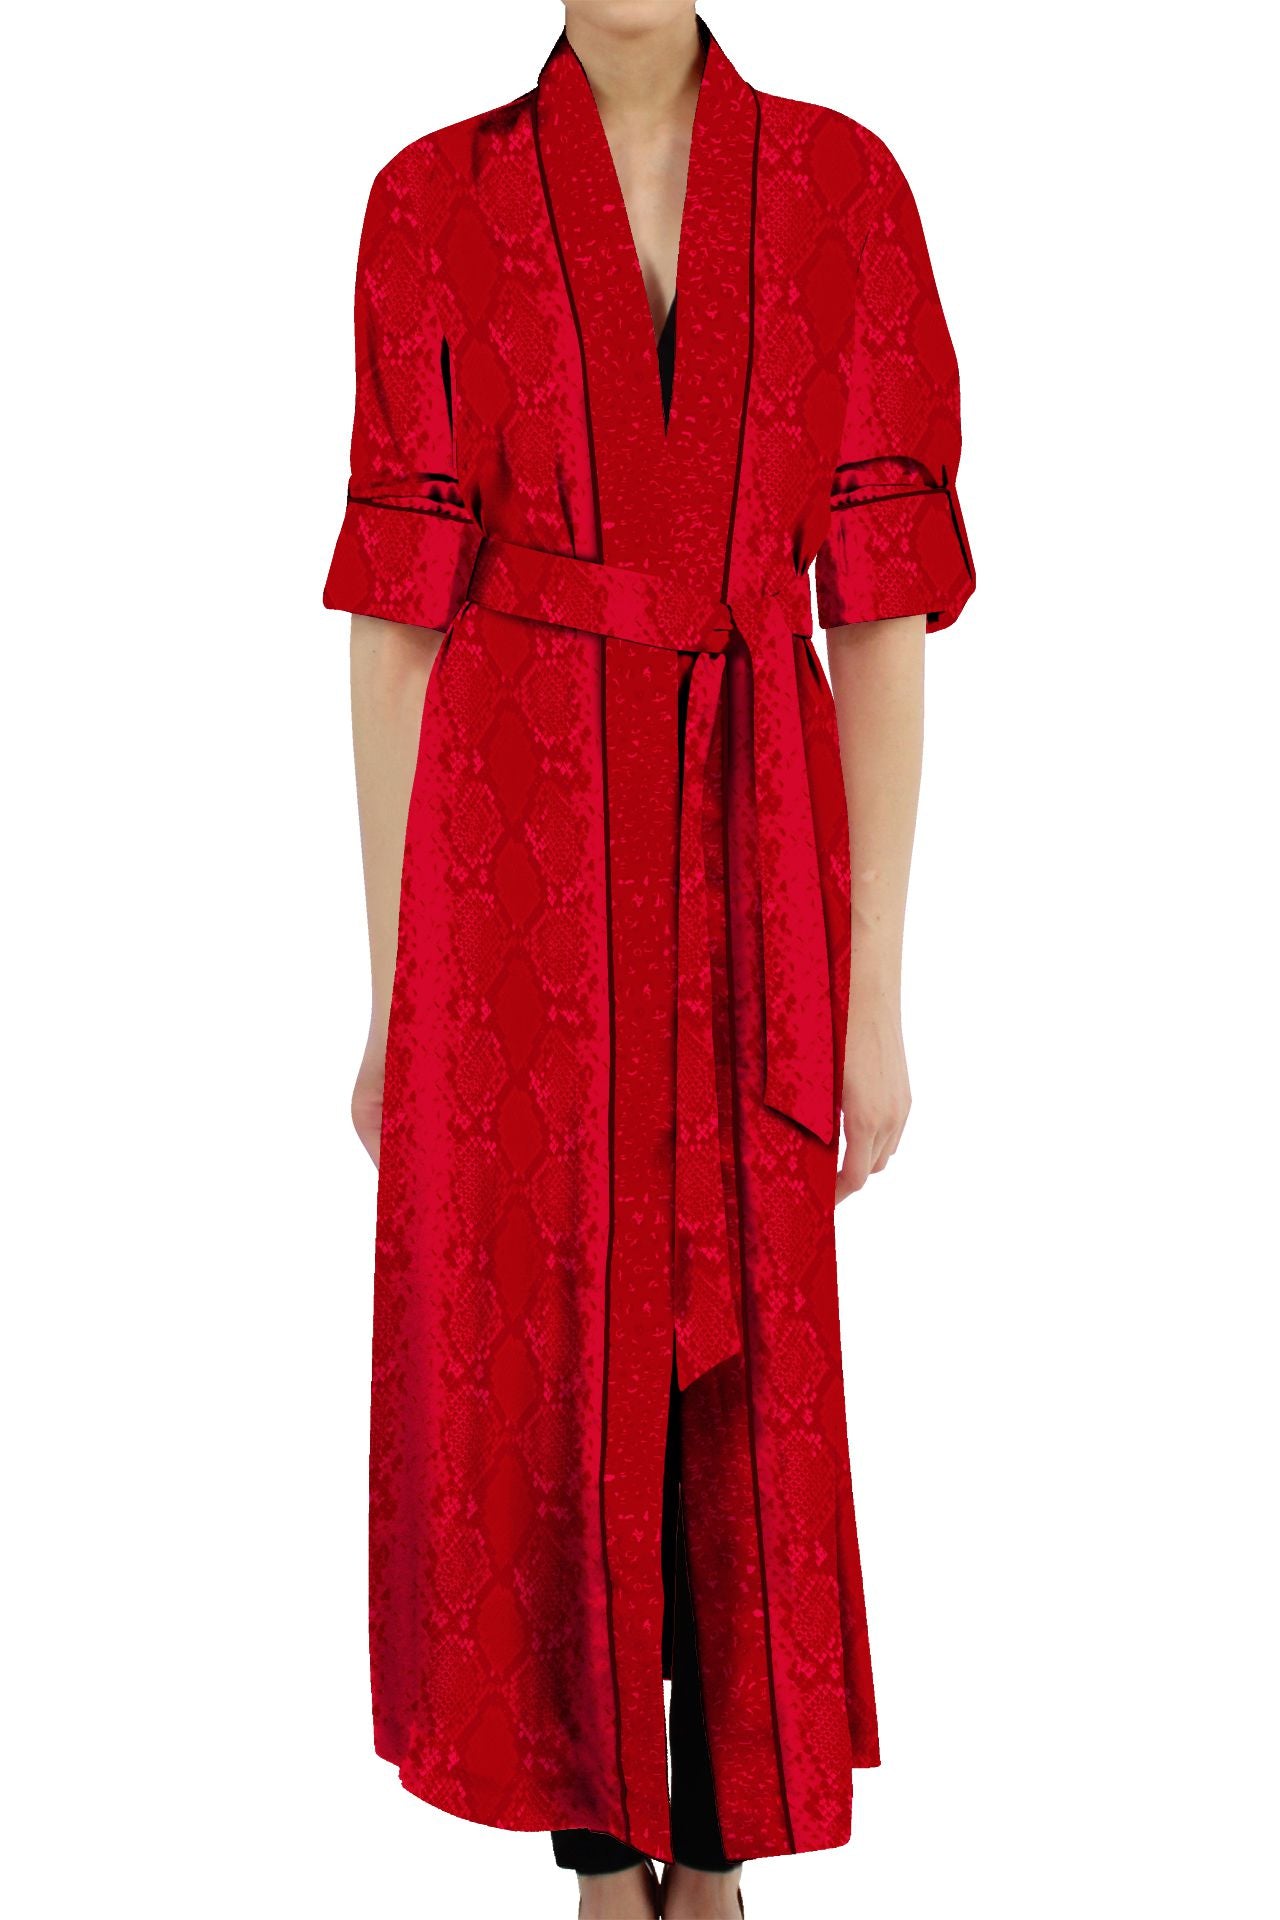 Biodegradable  Sustainable Silk  Long Robe Dress in Blood Stone